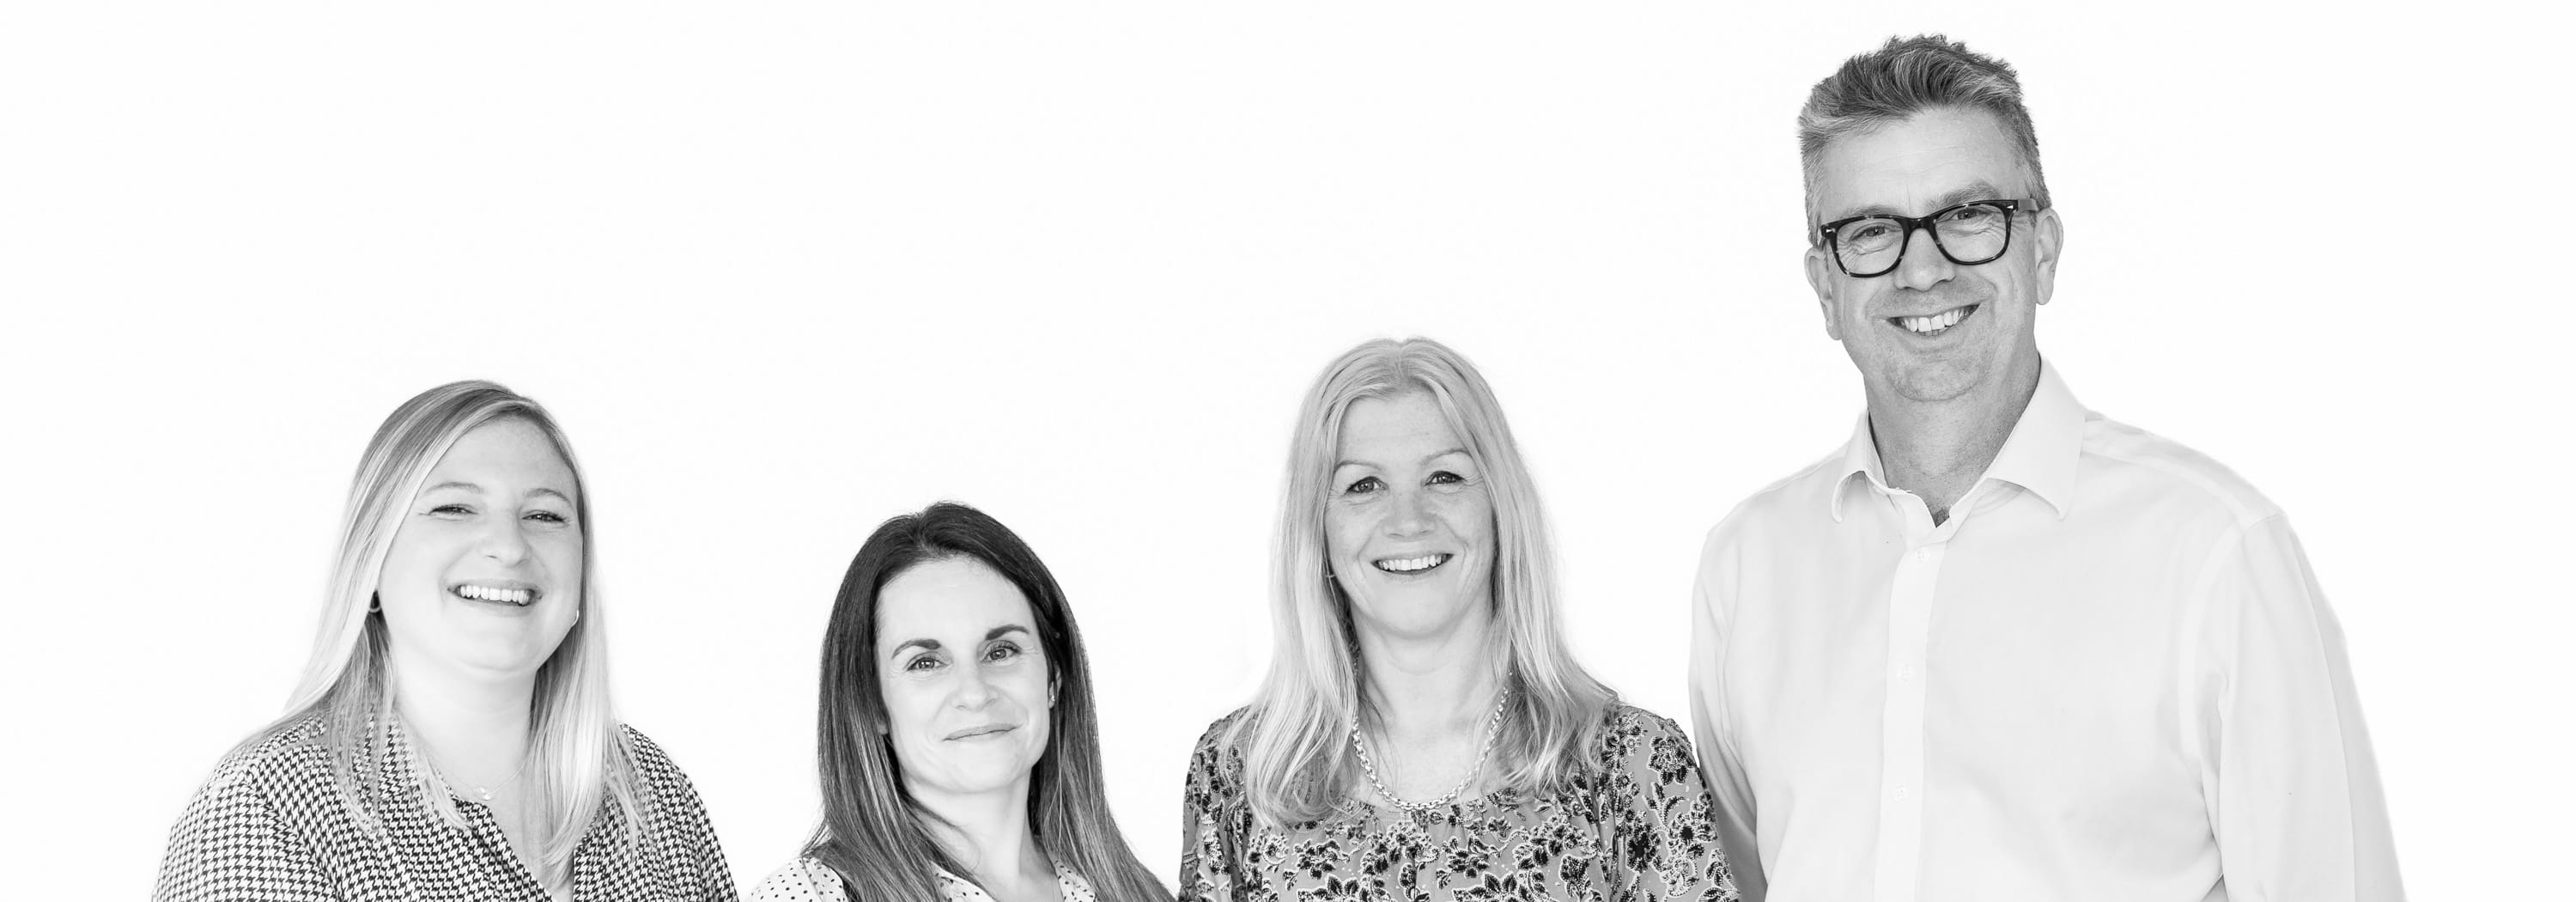 Black and White photo of Laura Ramm, Emily Bland, Tina Heale and Simon Dunscombe Employees at itecopeople stood in a line smiling